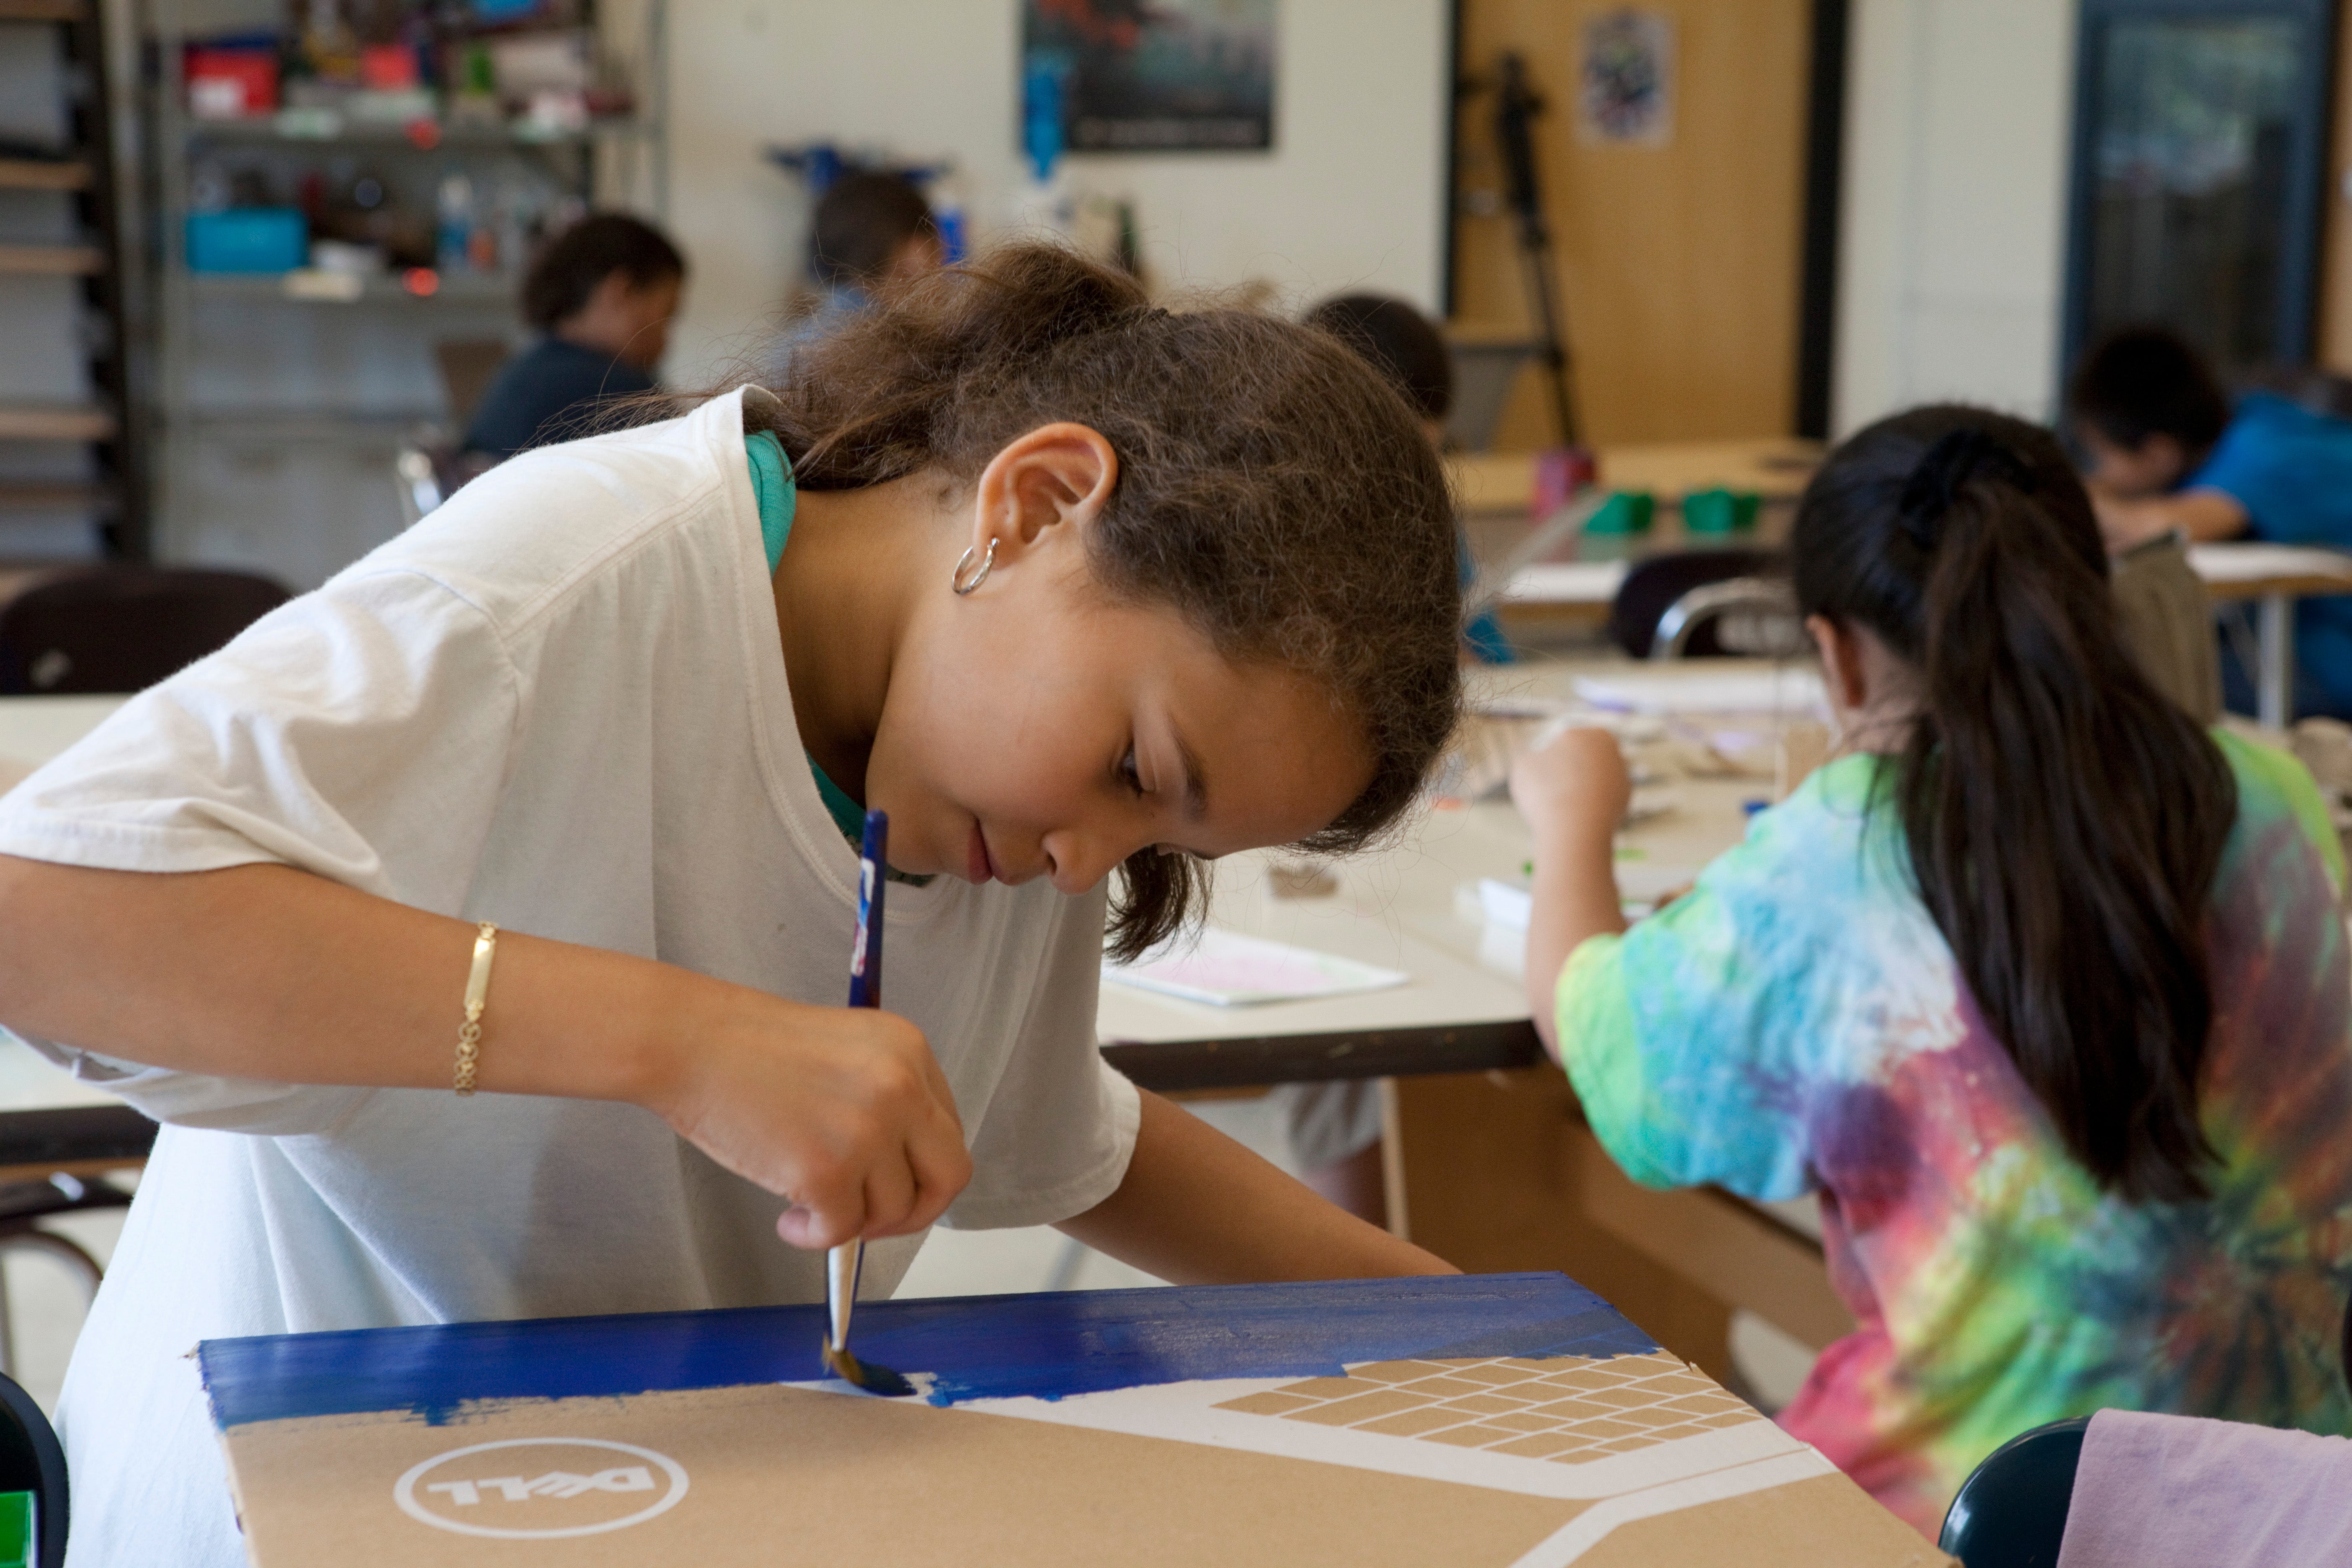 A girl uses a paintbrush with blue paint to work on her artwork.